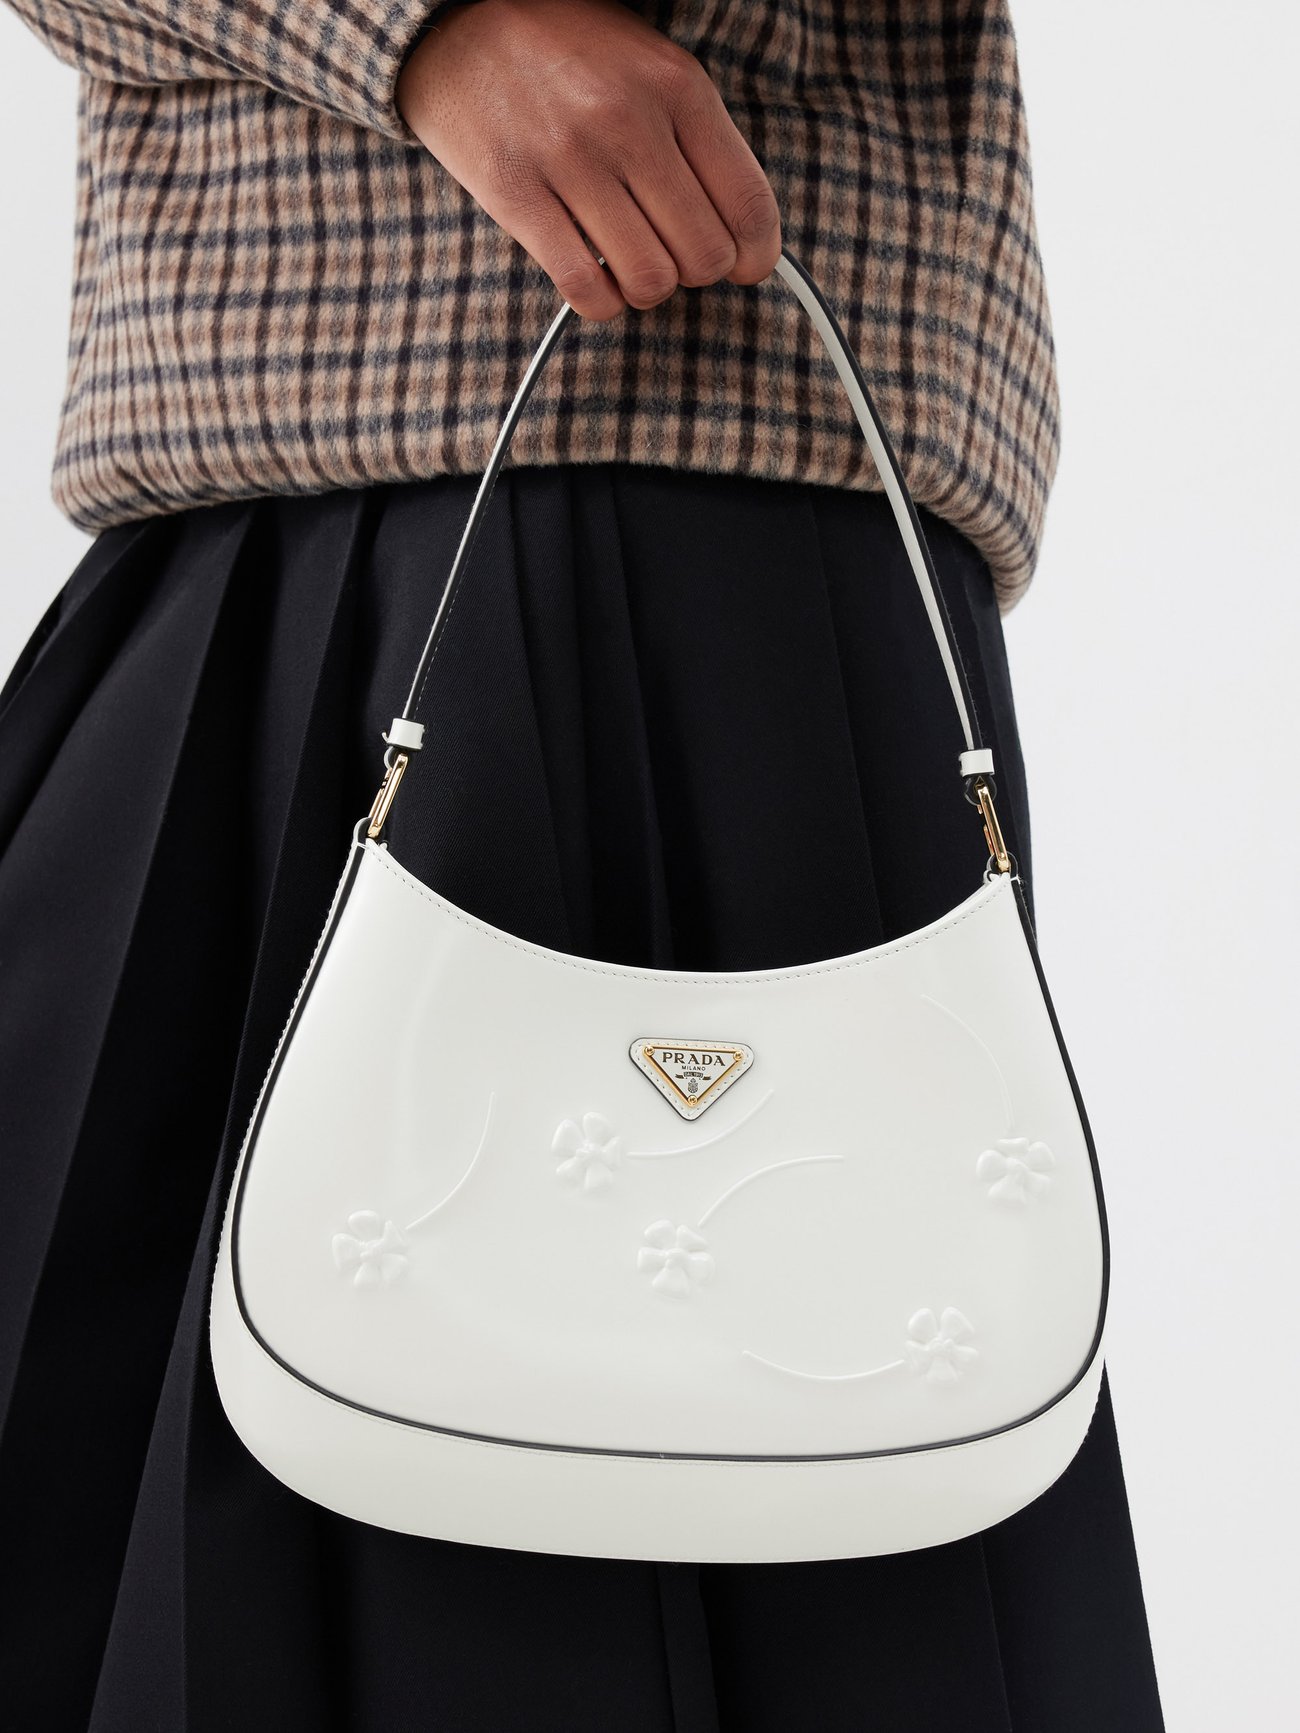 Prada Cleo Floral Leather Bag in White